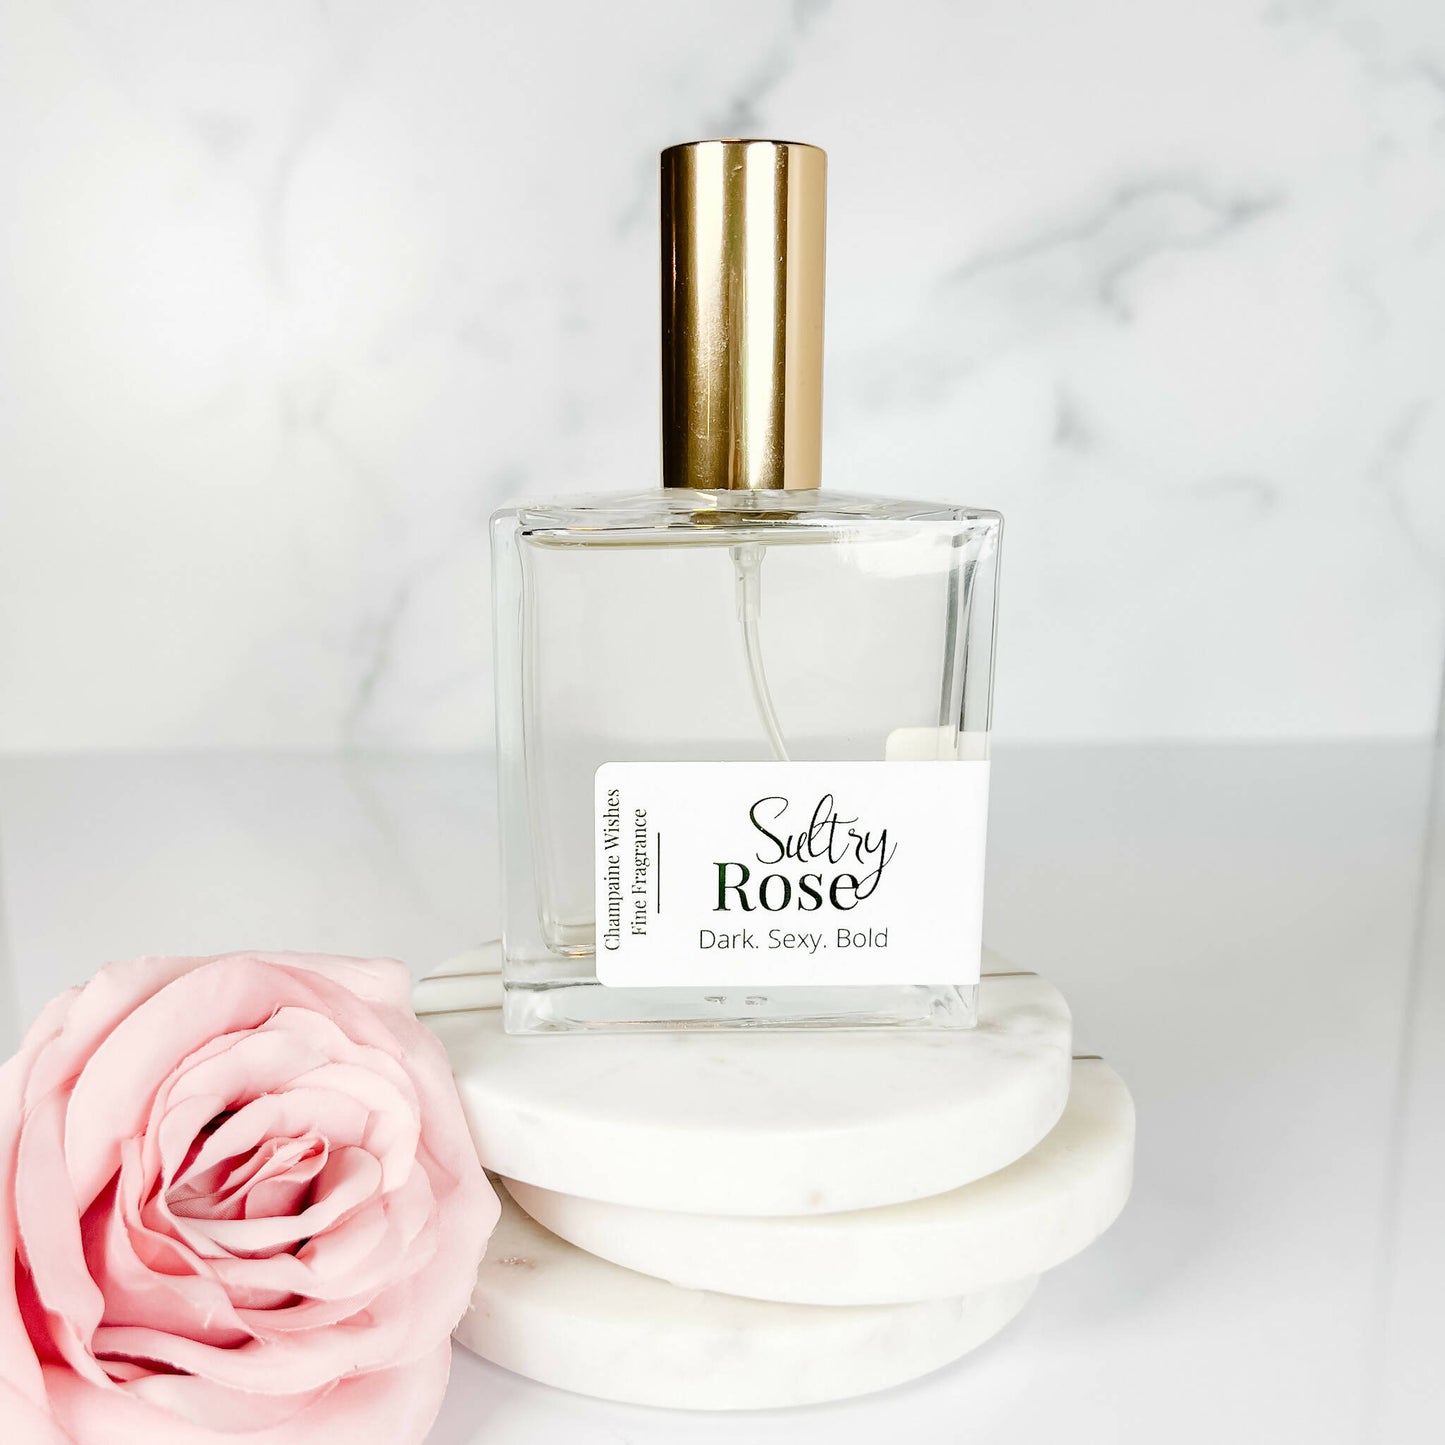 Sultry Rose Luxury Room Spray